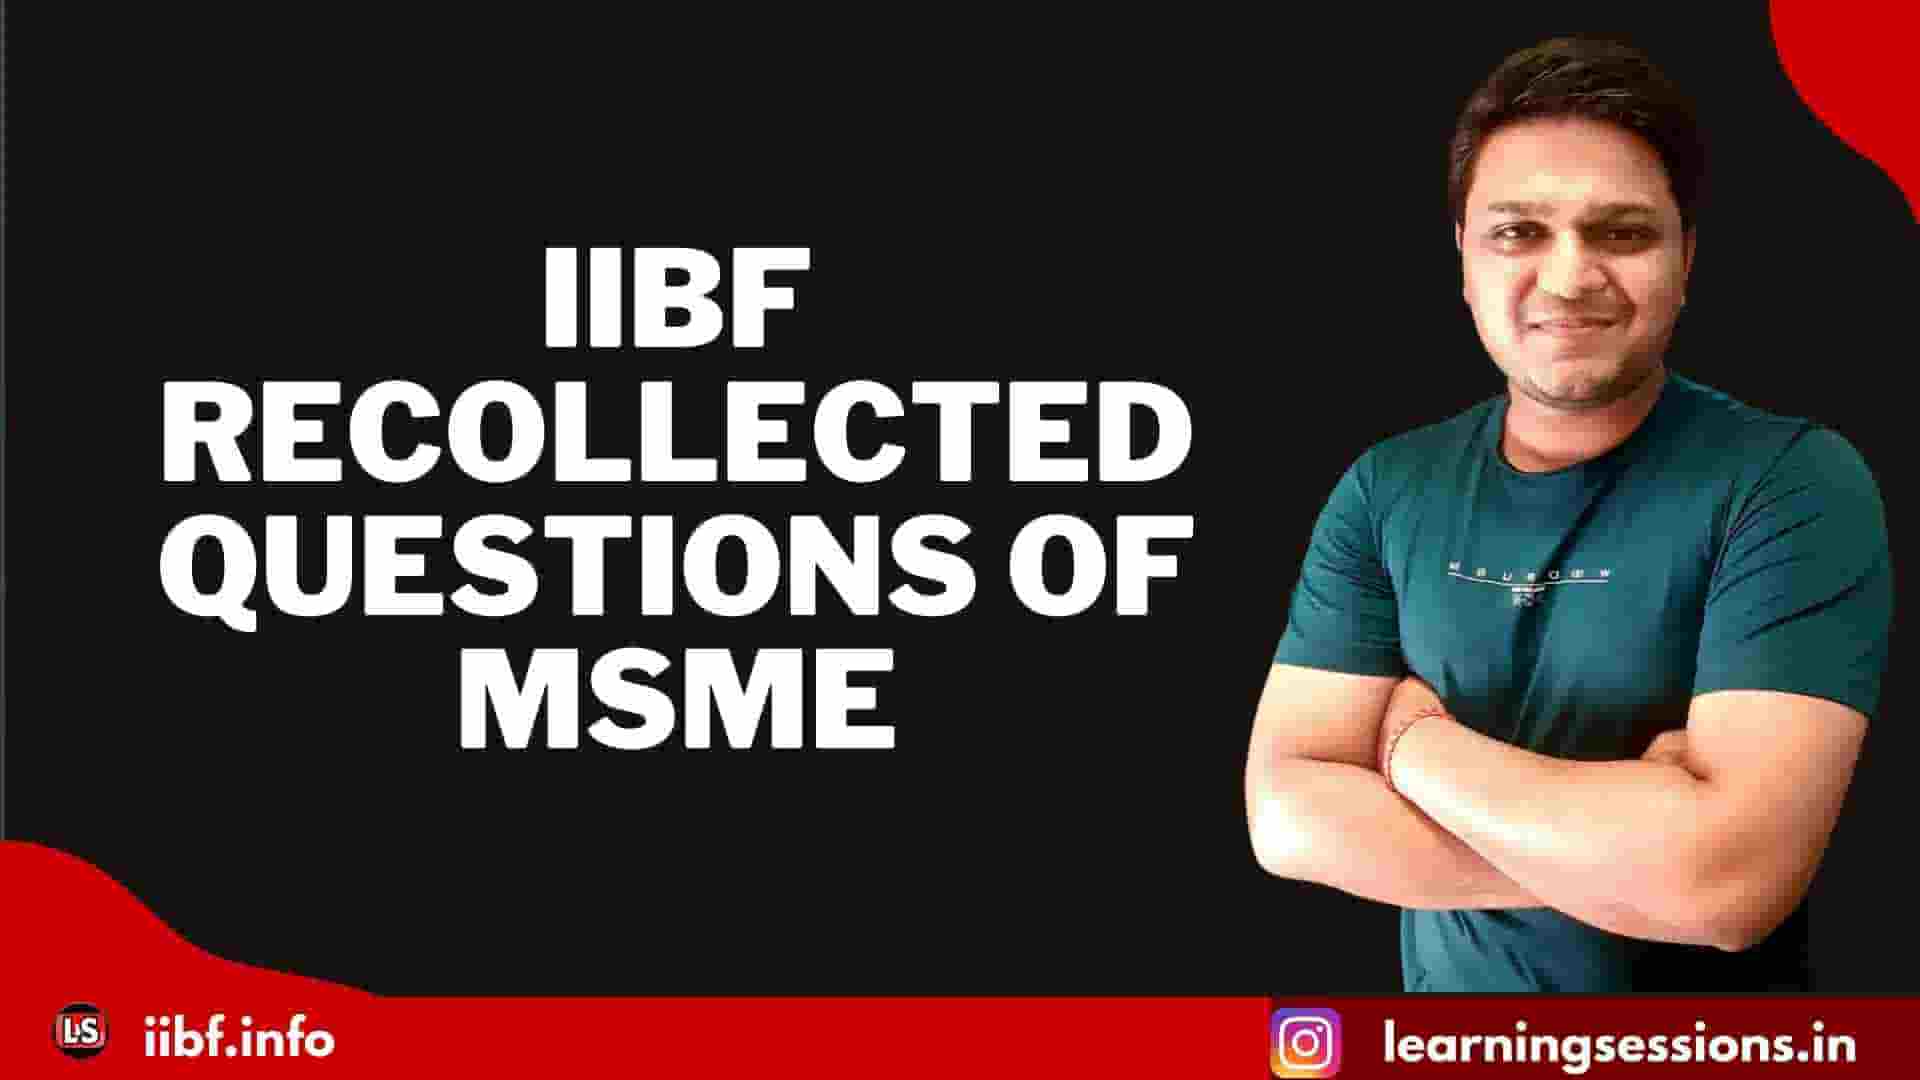 IIBF RECOLLECTED QUESTIONS OF MSME 2021-2022